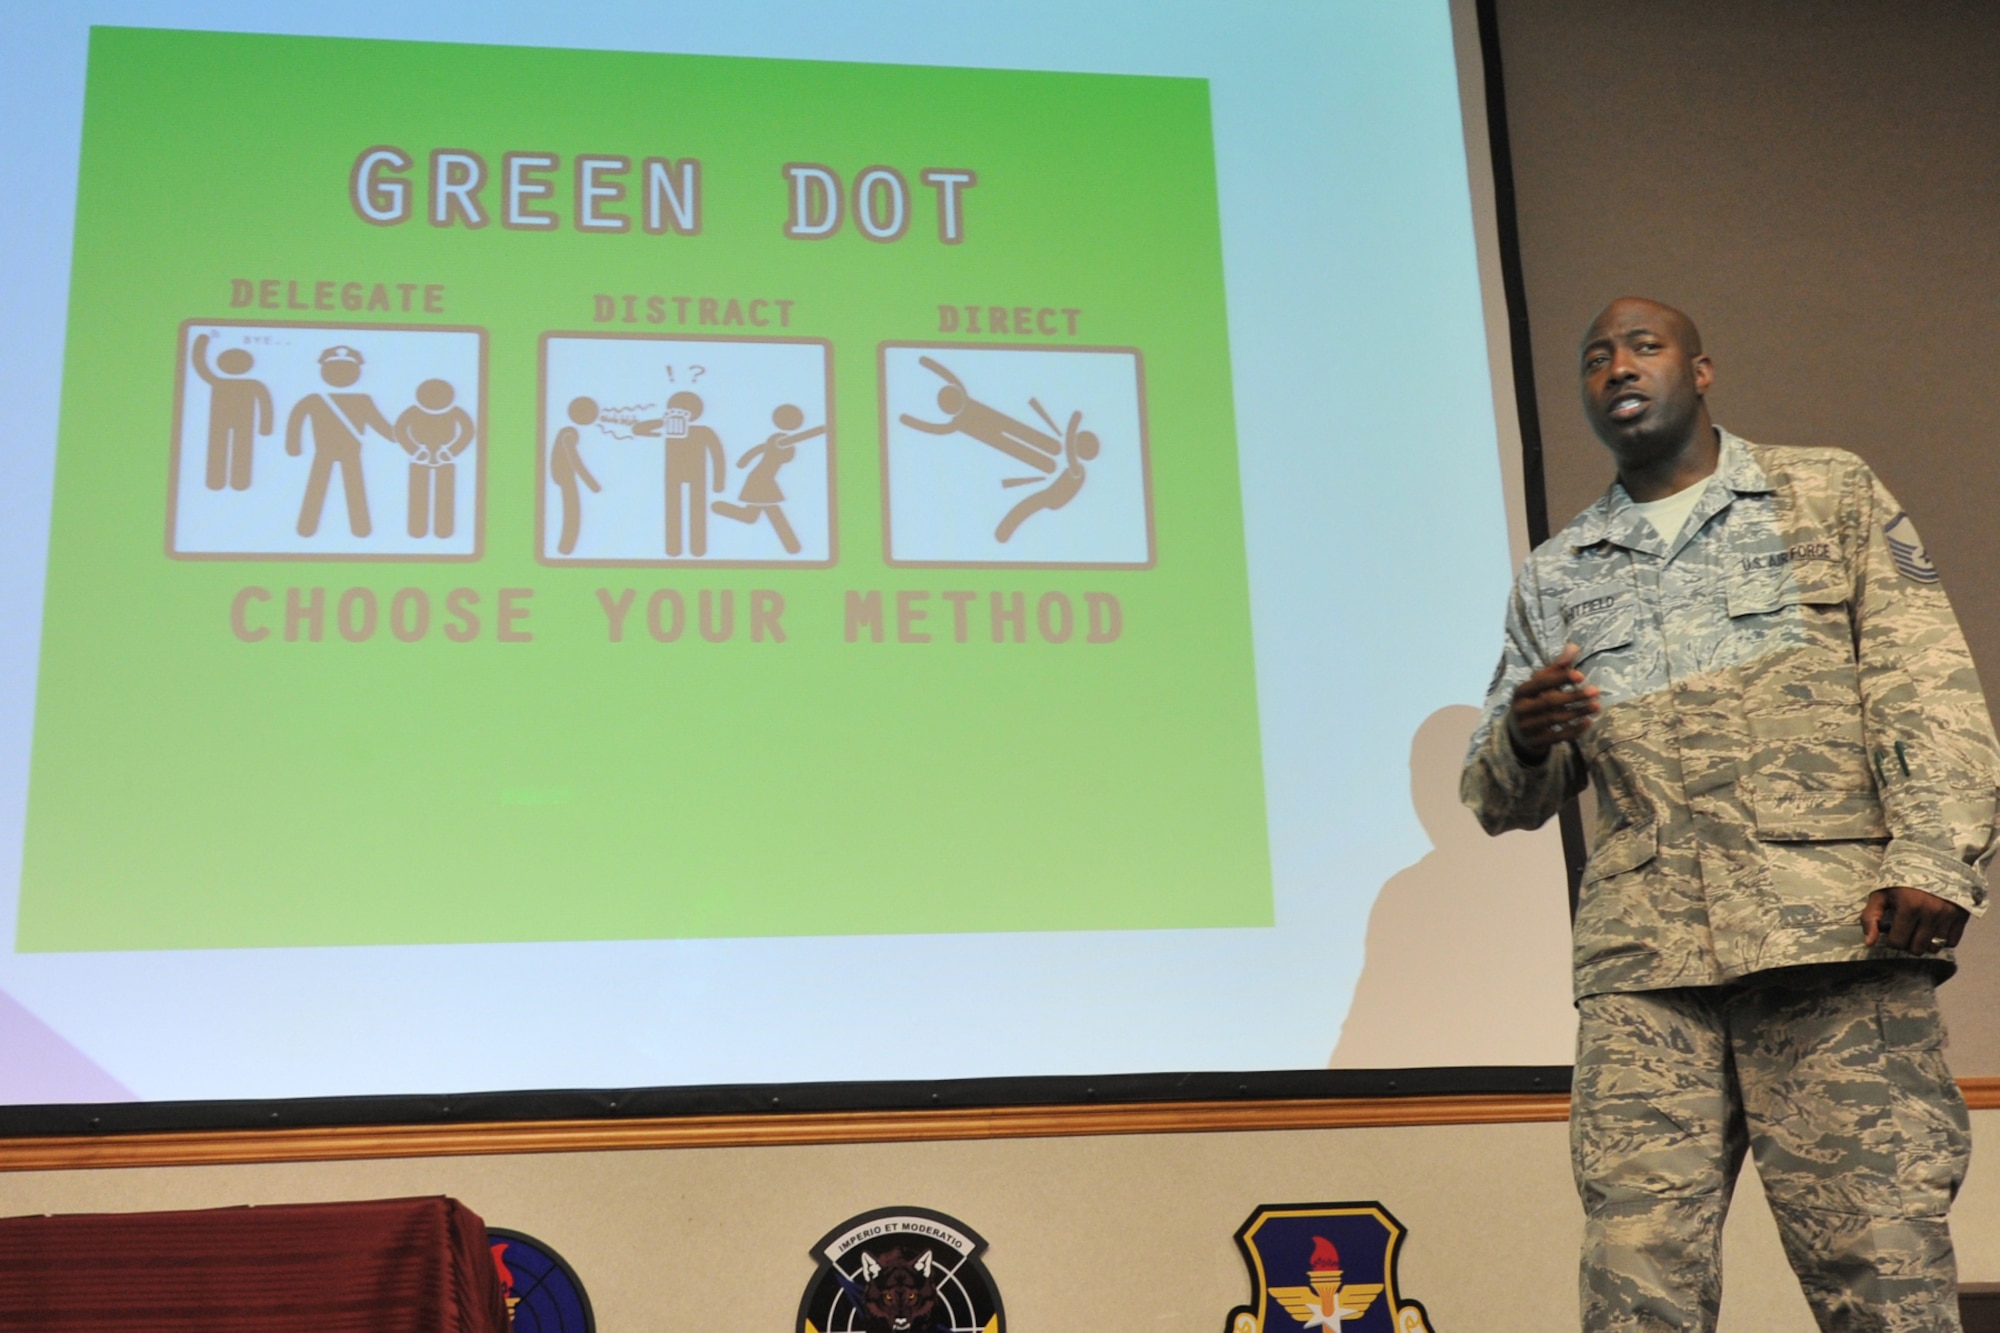 U.S. Air Force Master Sgt. Timothy Whitfield, 325th Maintenance Squadron munitions storage NCO in charge, explains the delegate, distract and direct methods of resolving a potentially interpersonal violent situation at the 337th Air Control Squadron Dex Rogers auditorium on Tyndall AFB, Fla., Oct. 20, 2016. Whitfield described multiple scenarios where each method would be most useful along with examples of how to avoid dangerous situations. (U.S. Air Force photo by Senior Airman Ty-Rico Lea/Released)